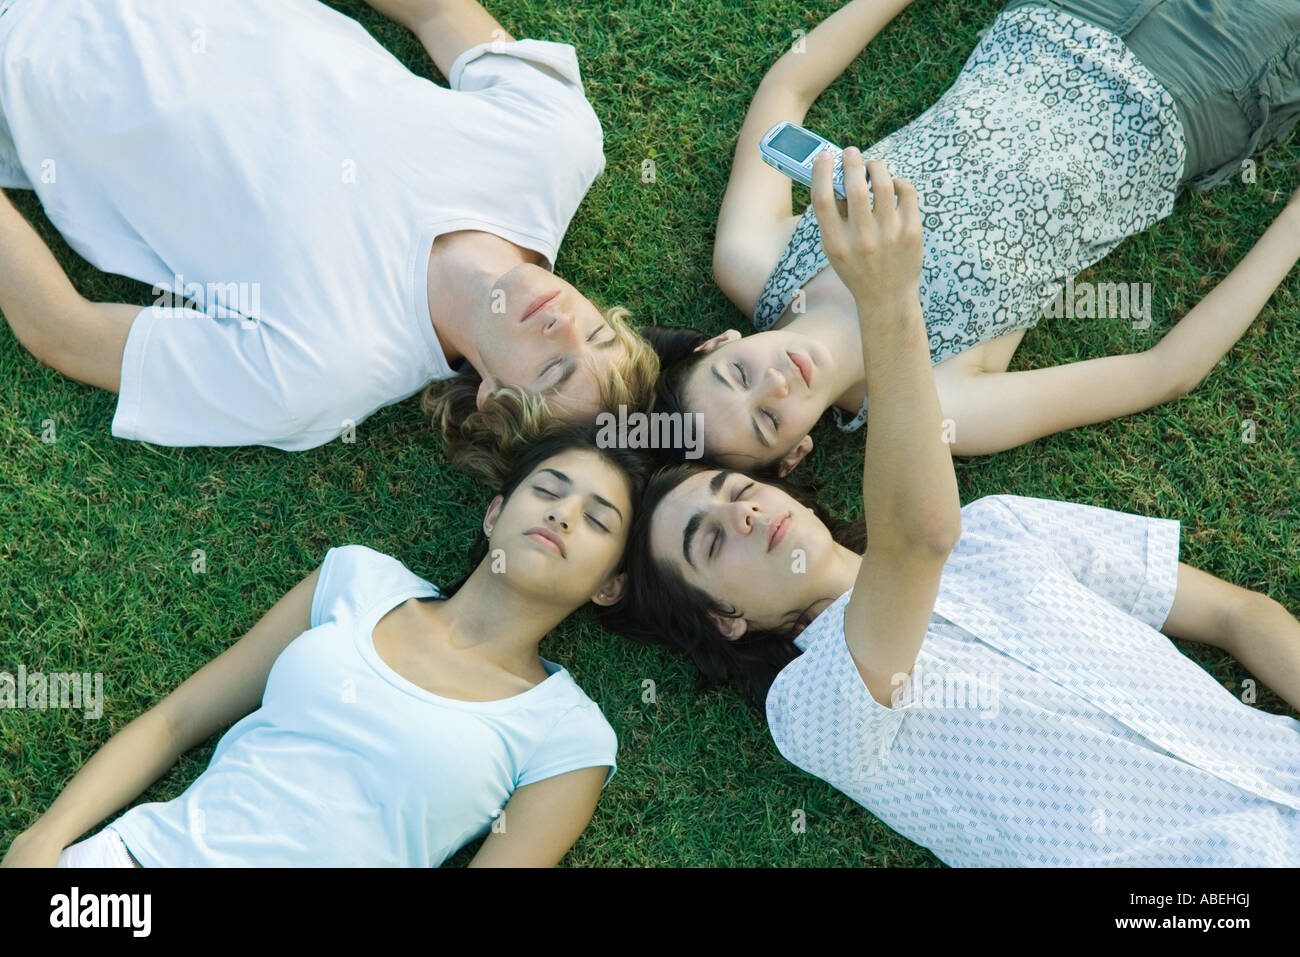 Group of young friends lying on grass with heads together, eyes closed, one taking photo with cell phone Stock Photo